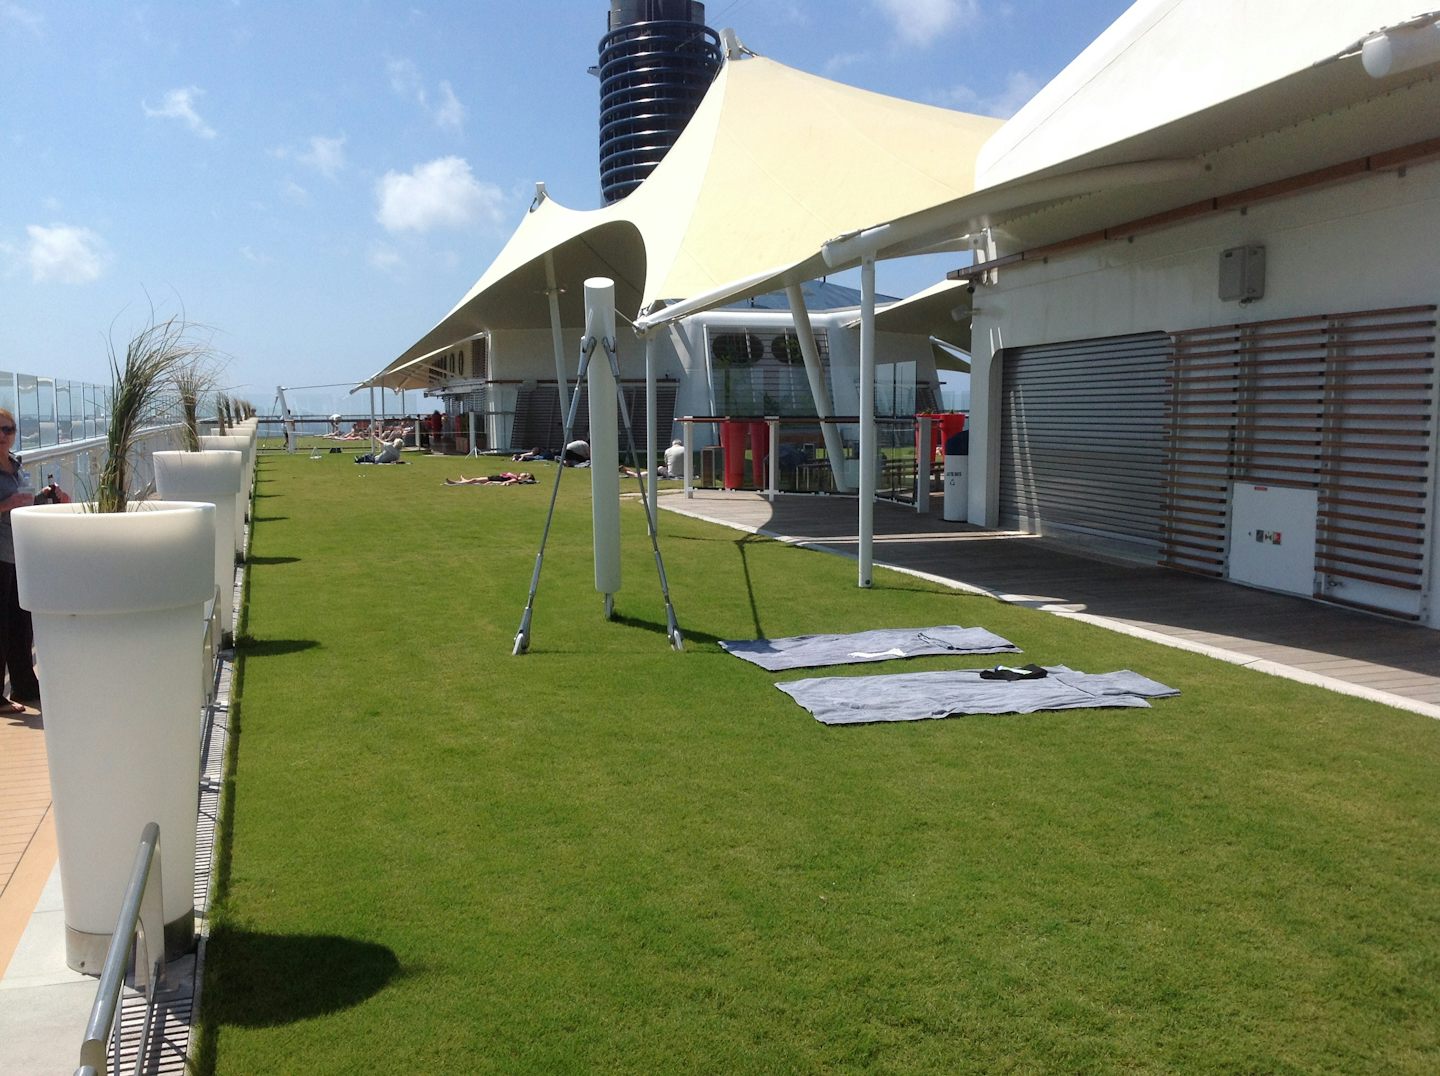 Bocce area, or just lay our and relax (real grass lawn. Putting green also